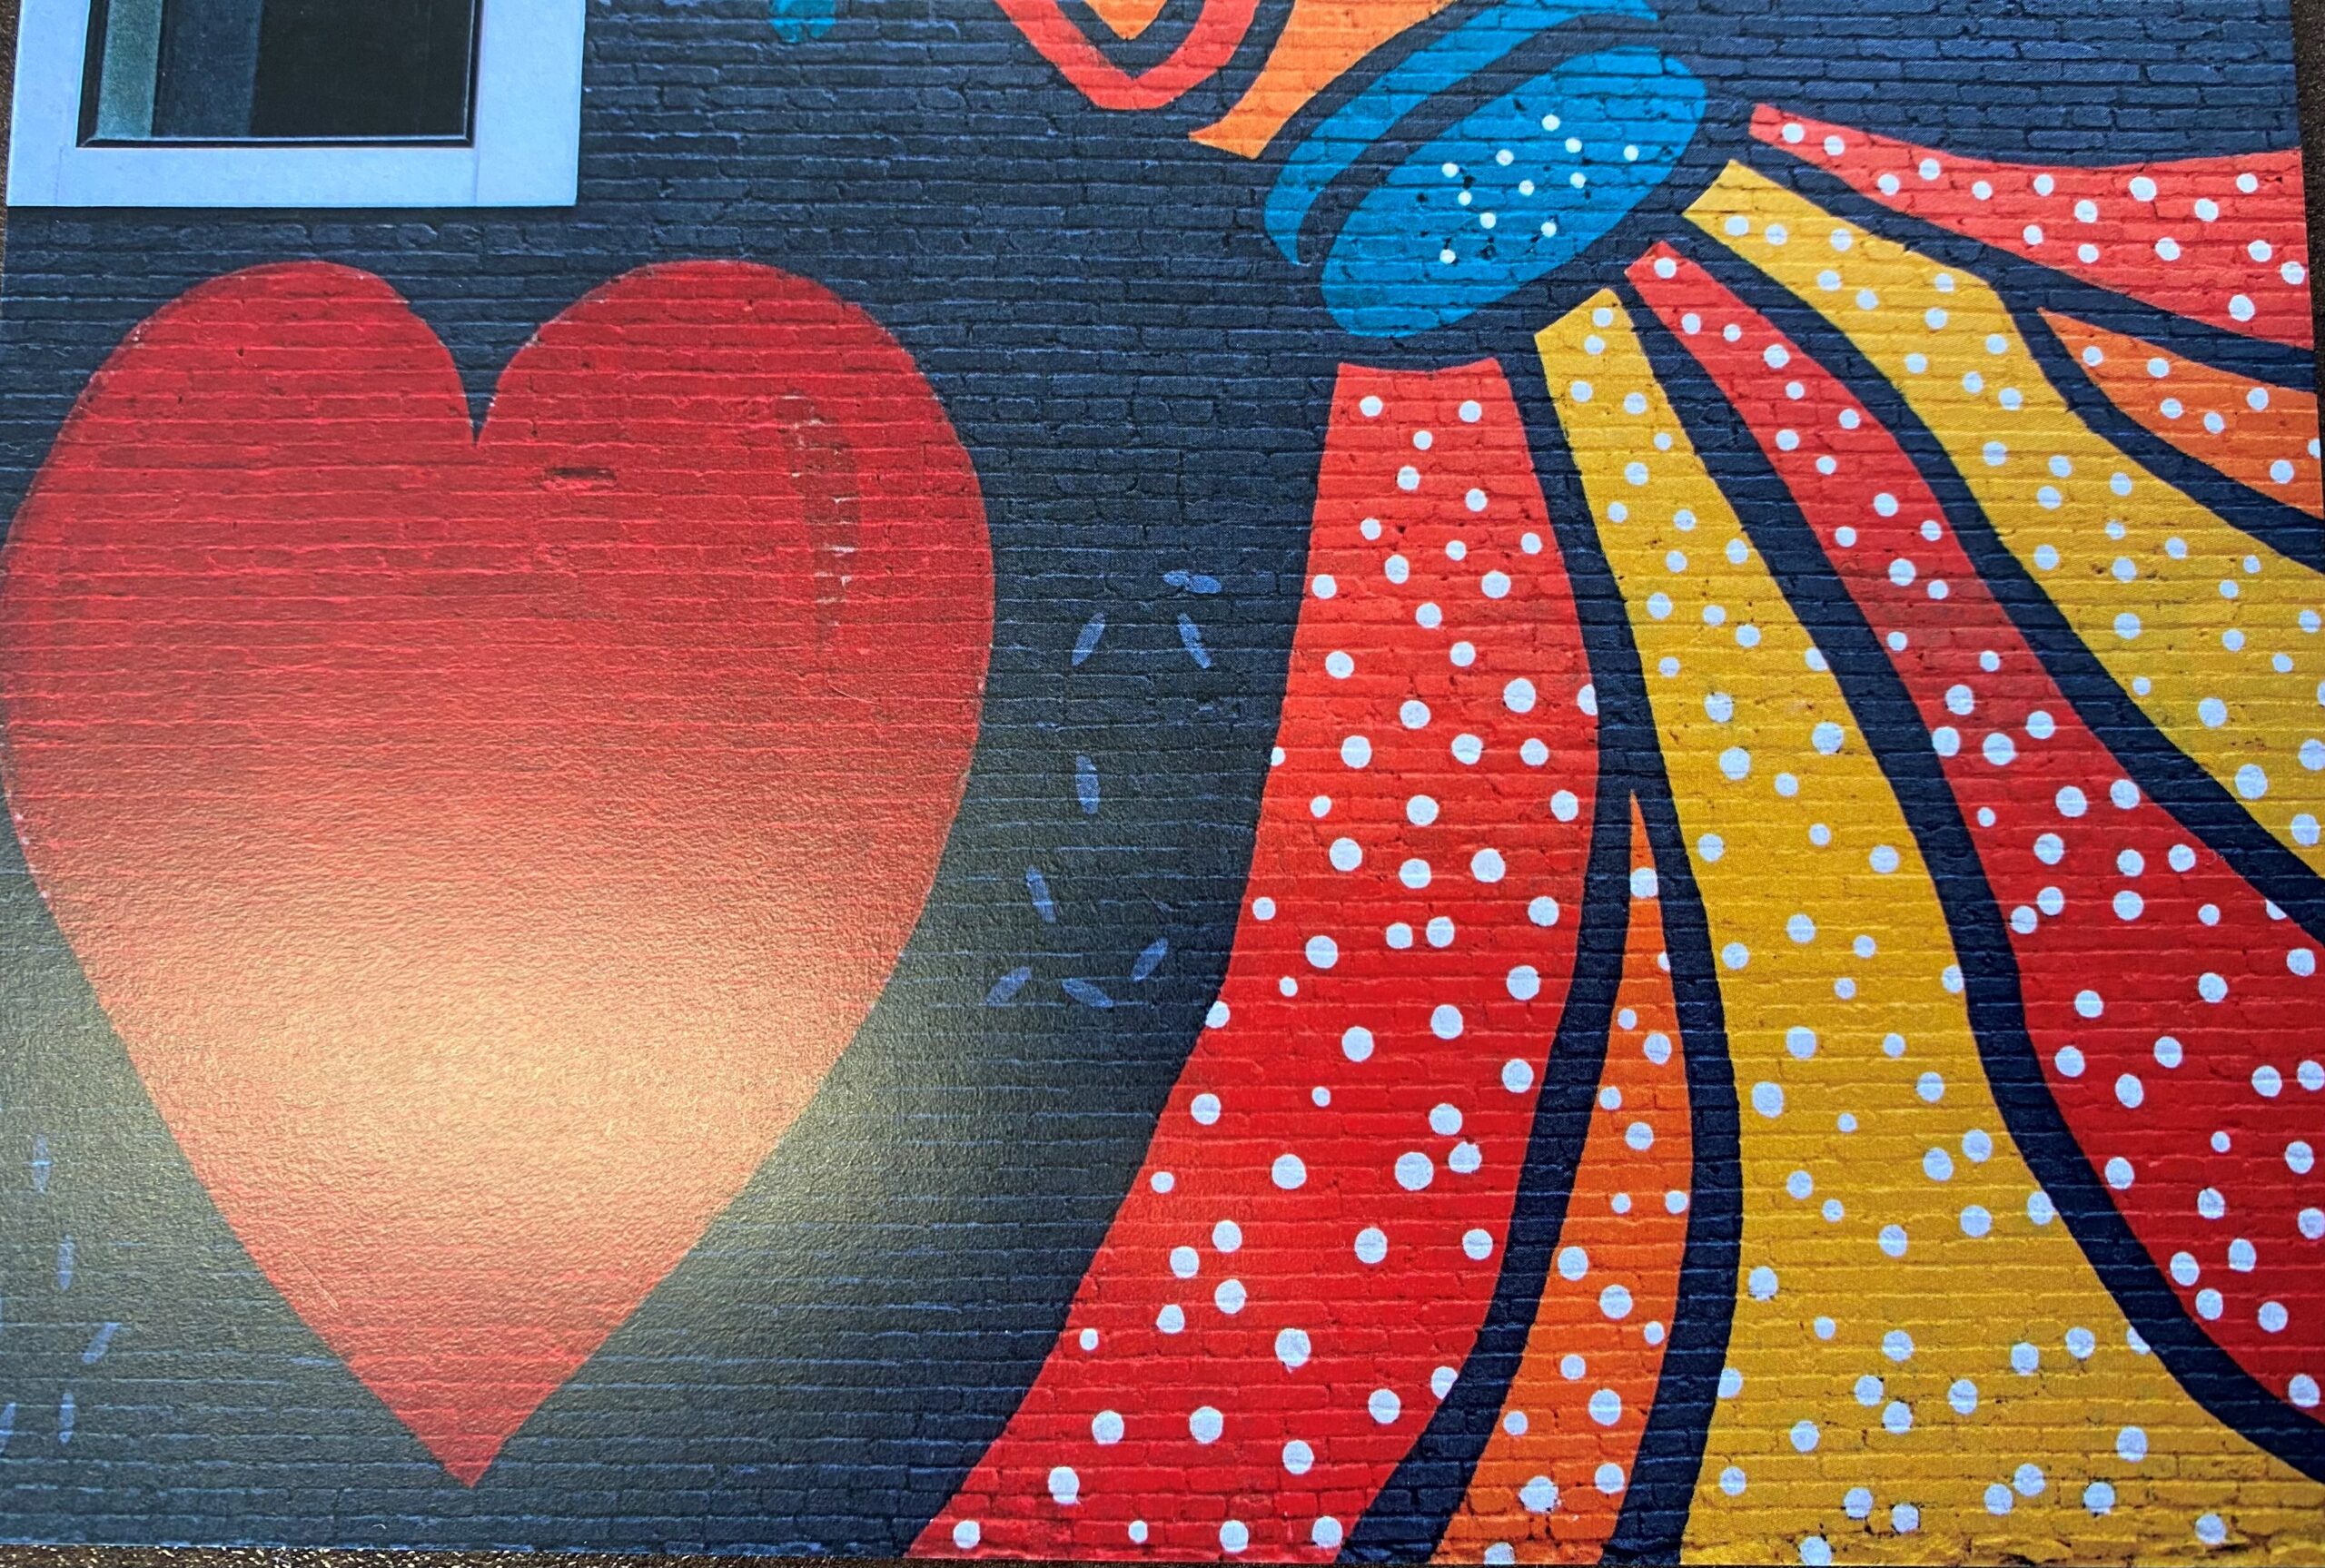 A mural with a red heart and a salt shaker titled "Everything but the Kitchen" in Syracuse, NY.